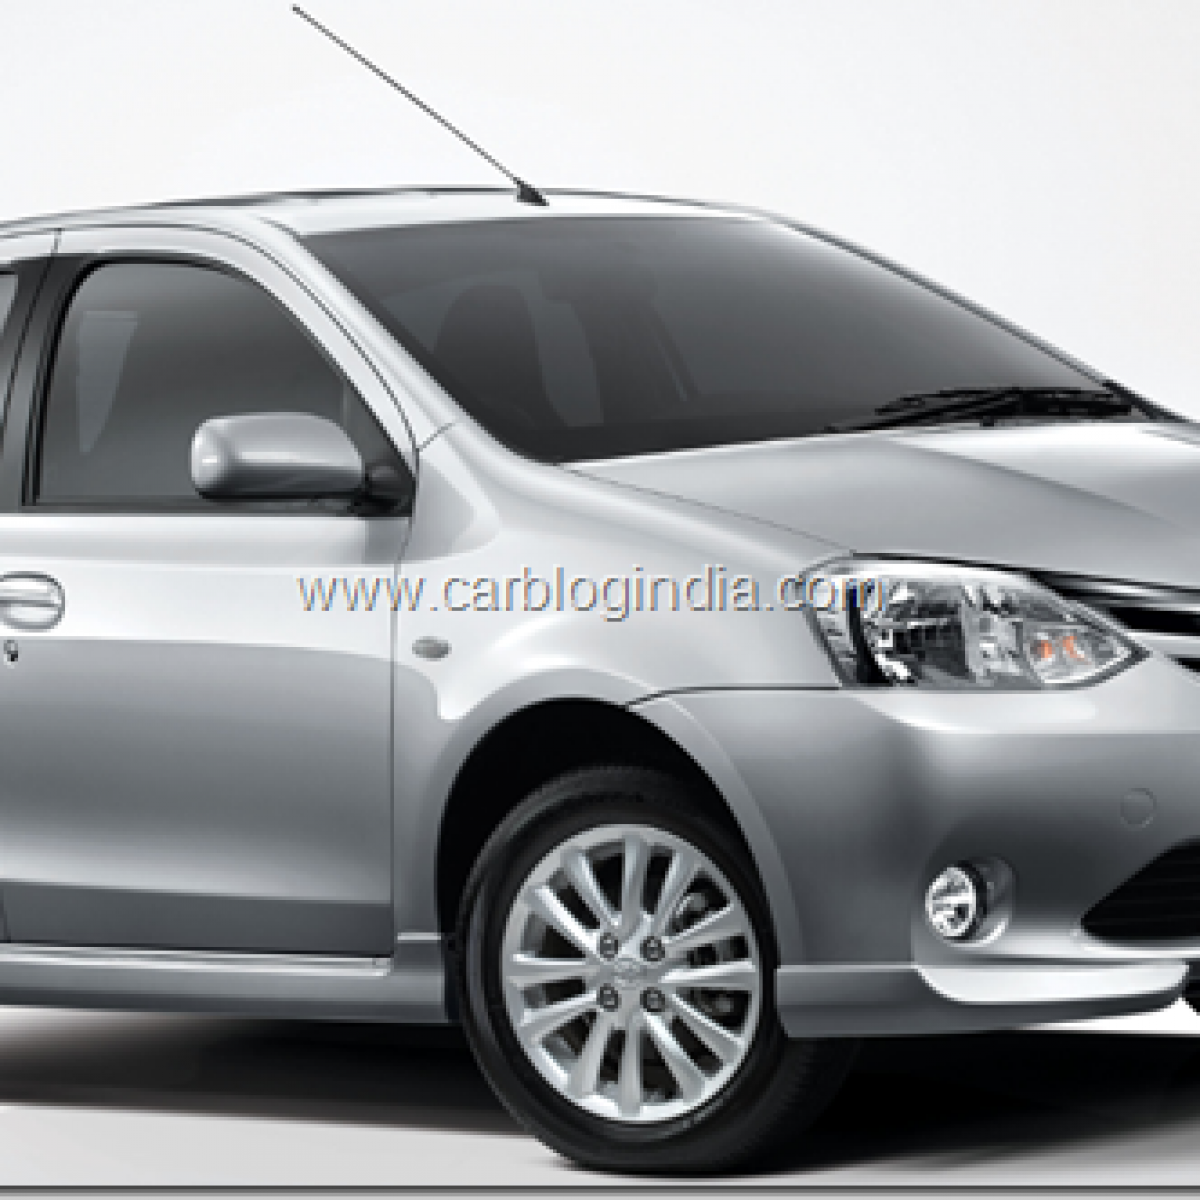 Toyota Etios Liva Launched In India Official Price Rs 3 99